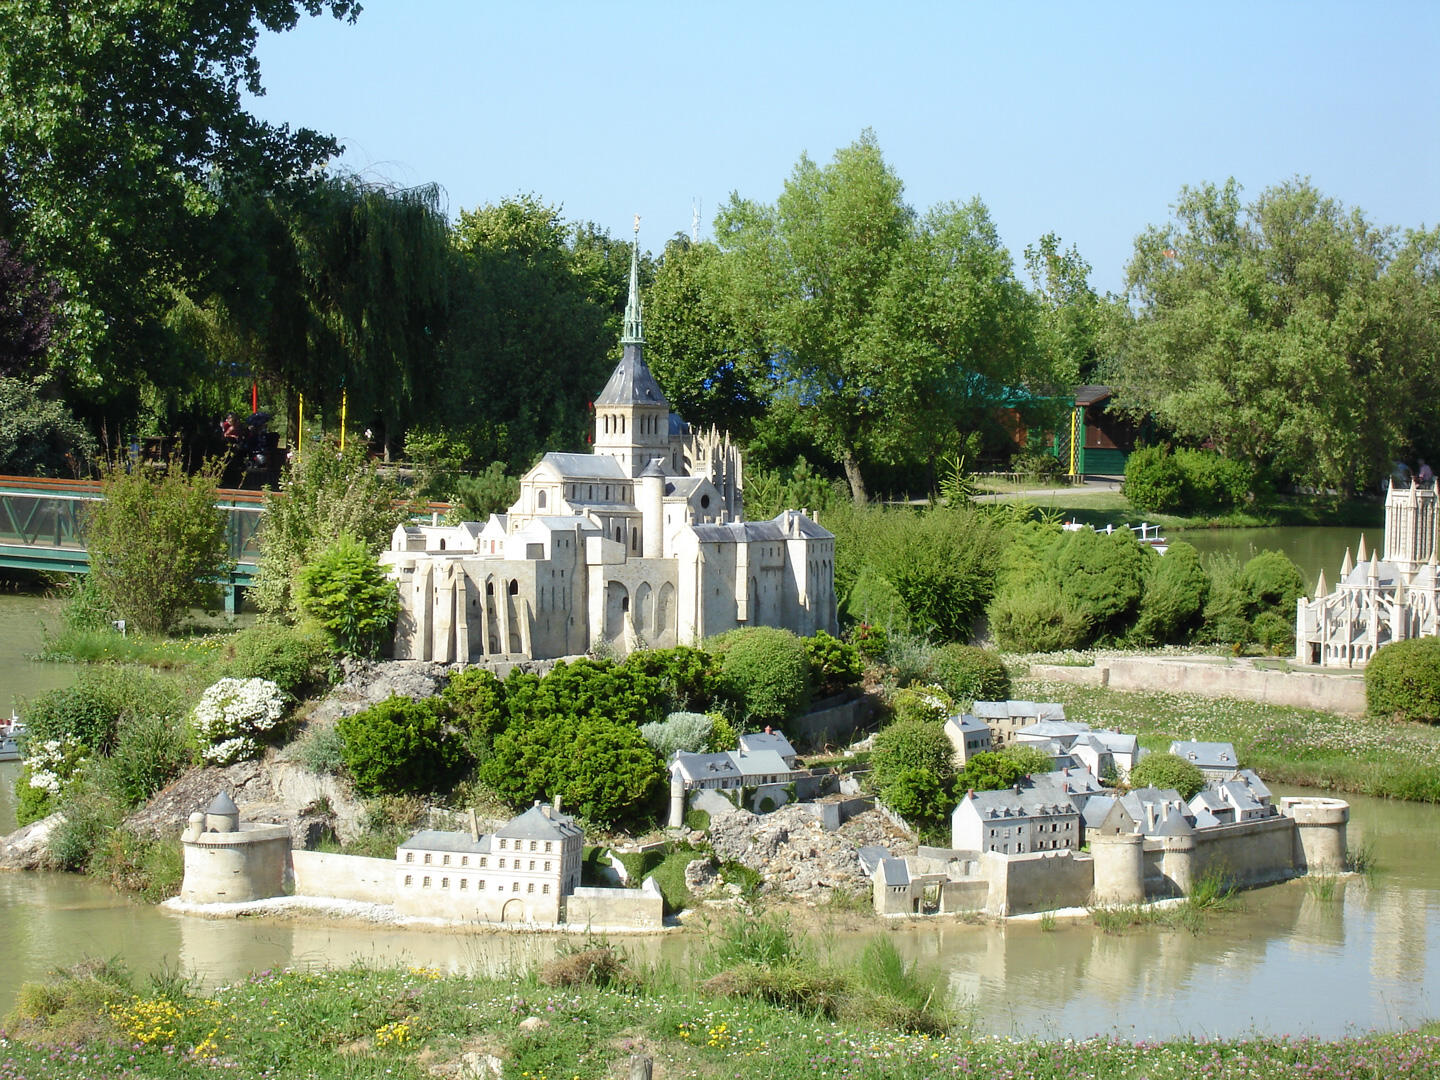 Detailed miniature model of a French château surrounded by scaled-down historic buildings and greenery, reflecting France's heritage at France Miniature park.